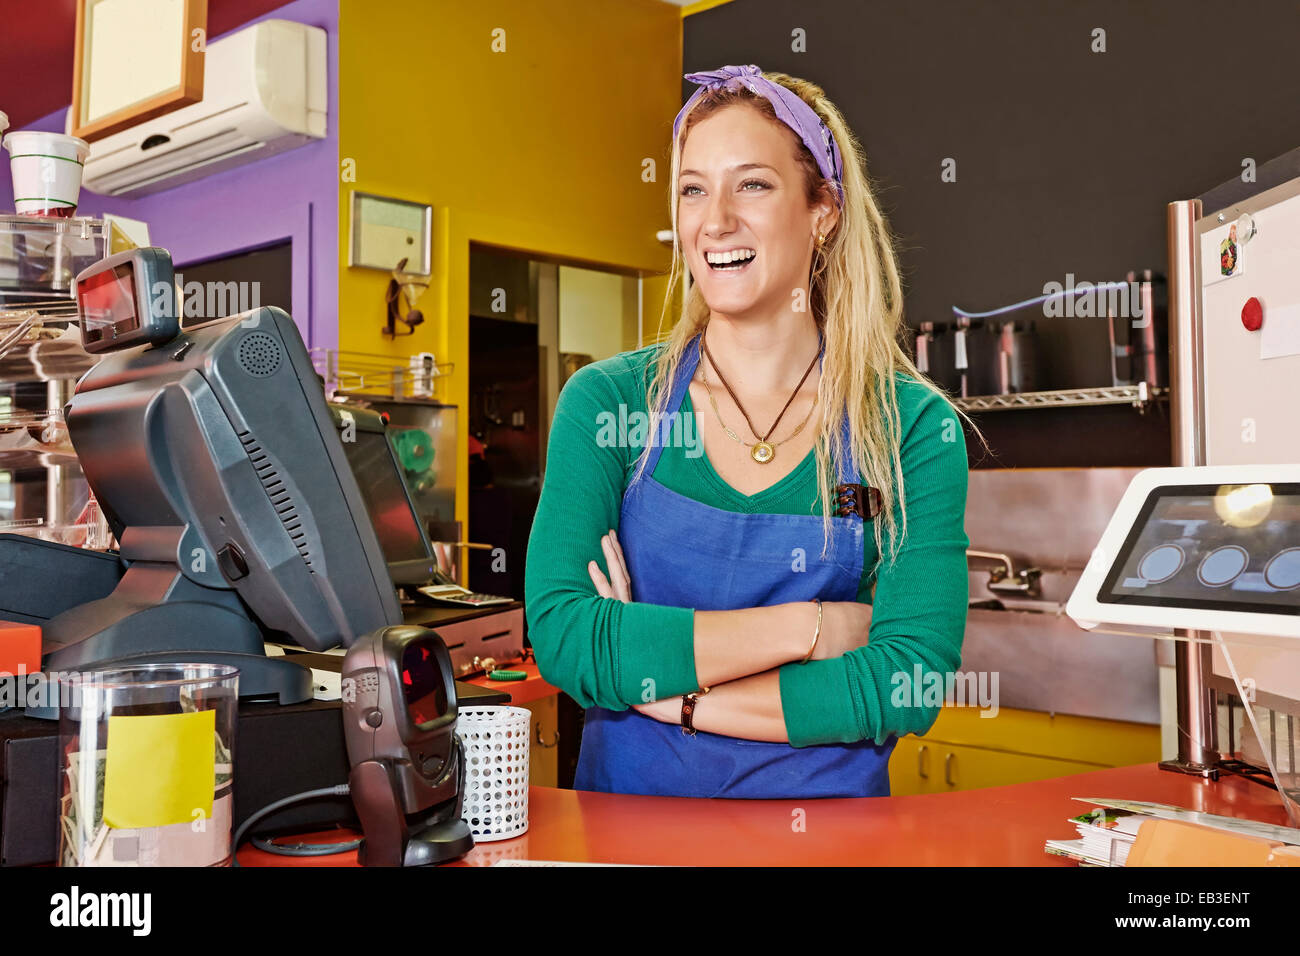 Caucasian woman working in cafe Stock Photo